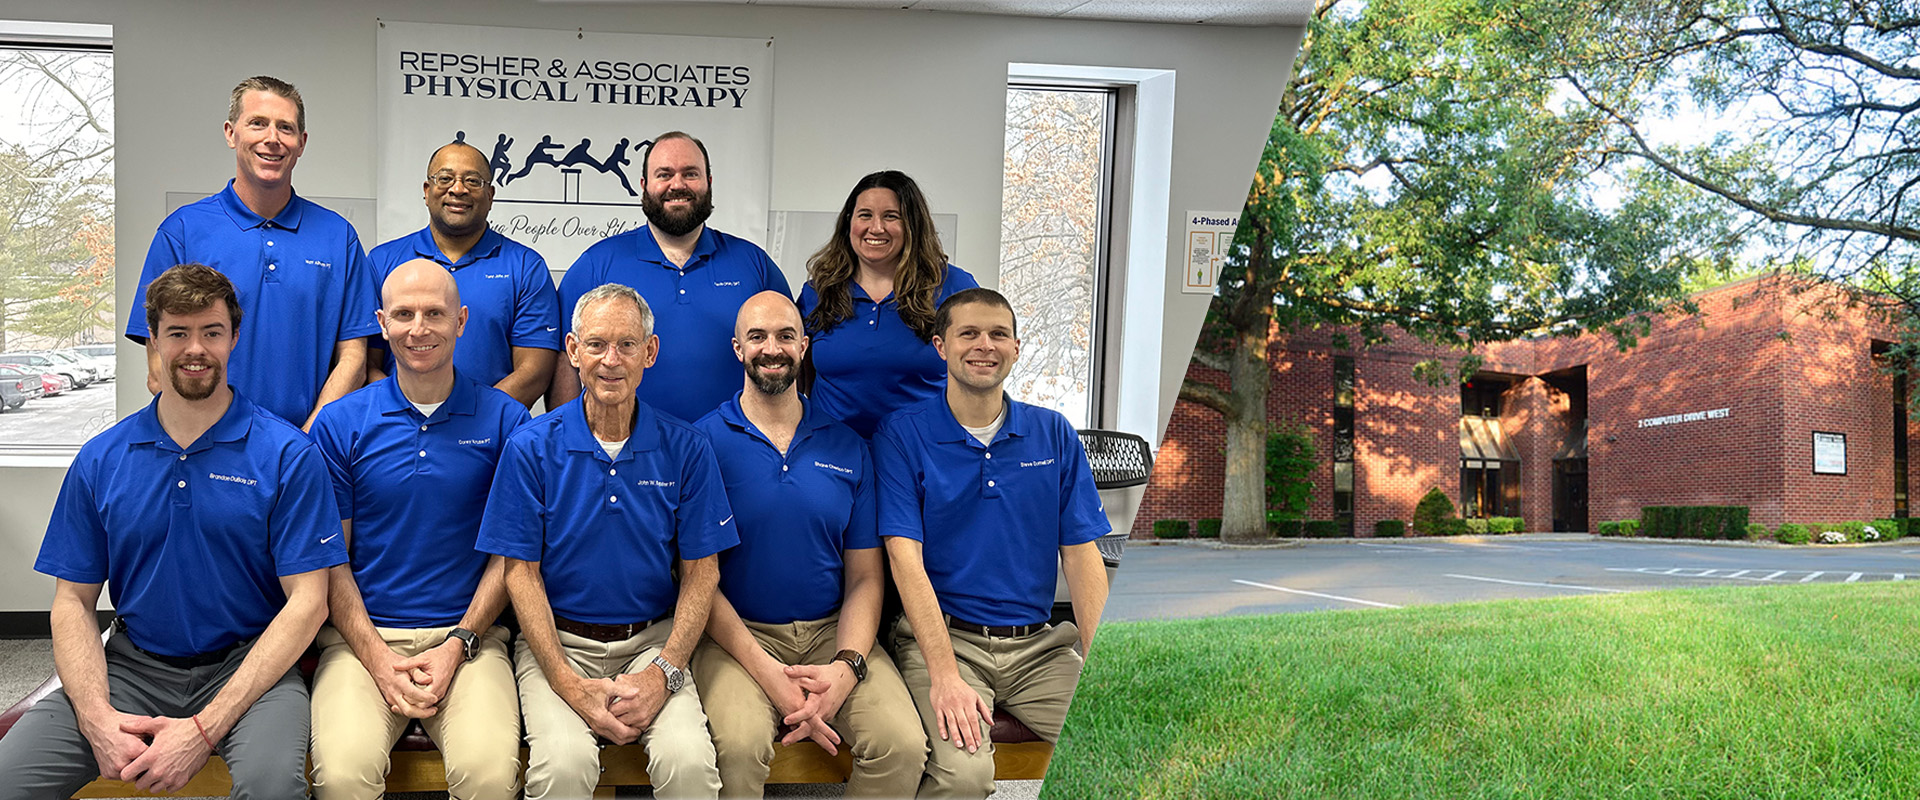 home-page-banner-repsher-associates-physical-therapy-albany-ny